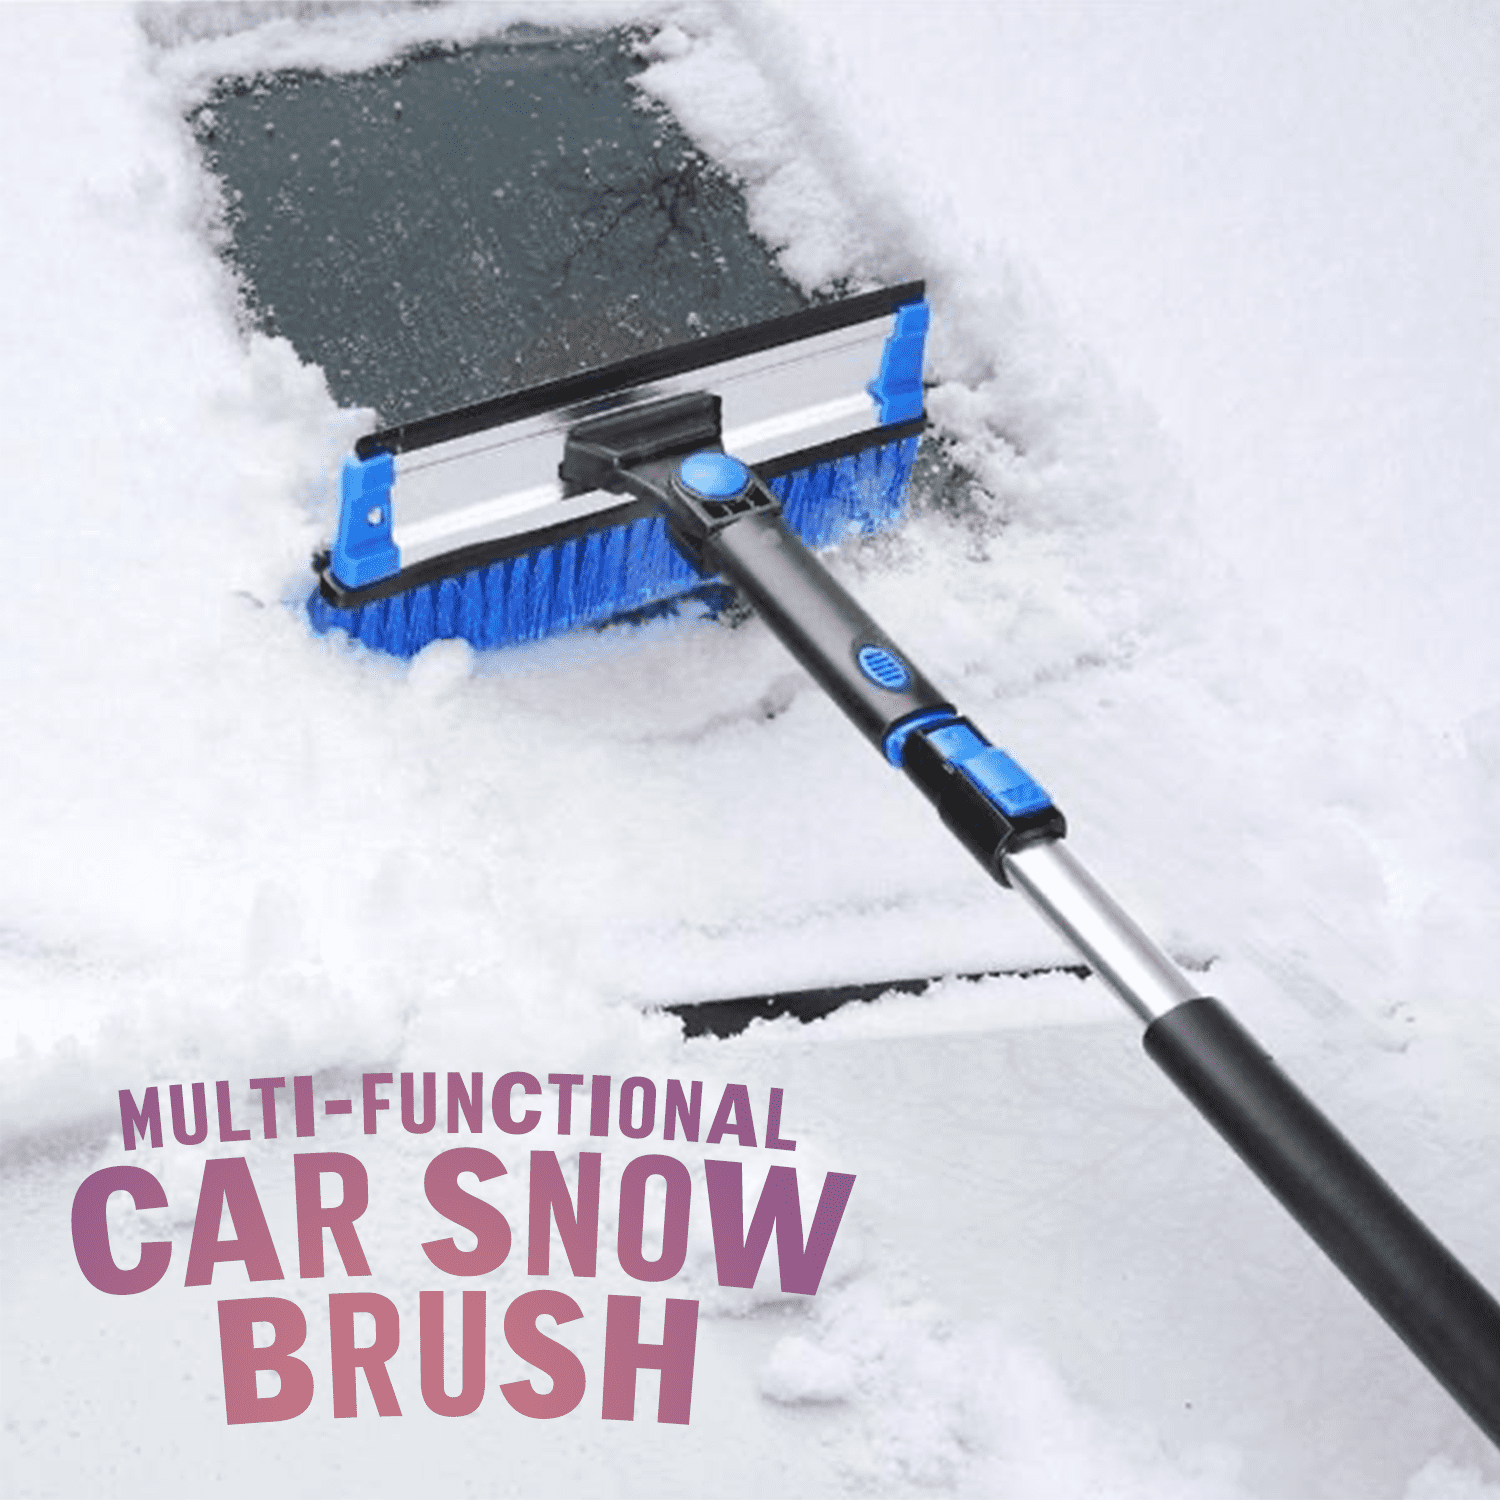 Mionyl 60 Extendable Ice Scraper and Snow Brush for Car Windshield, Heavy  Duty Detachable Snow Removal Tool with Ergonomic Foam Grip and 270°